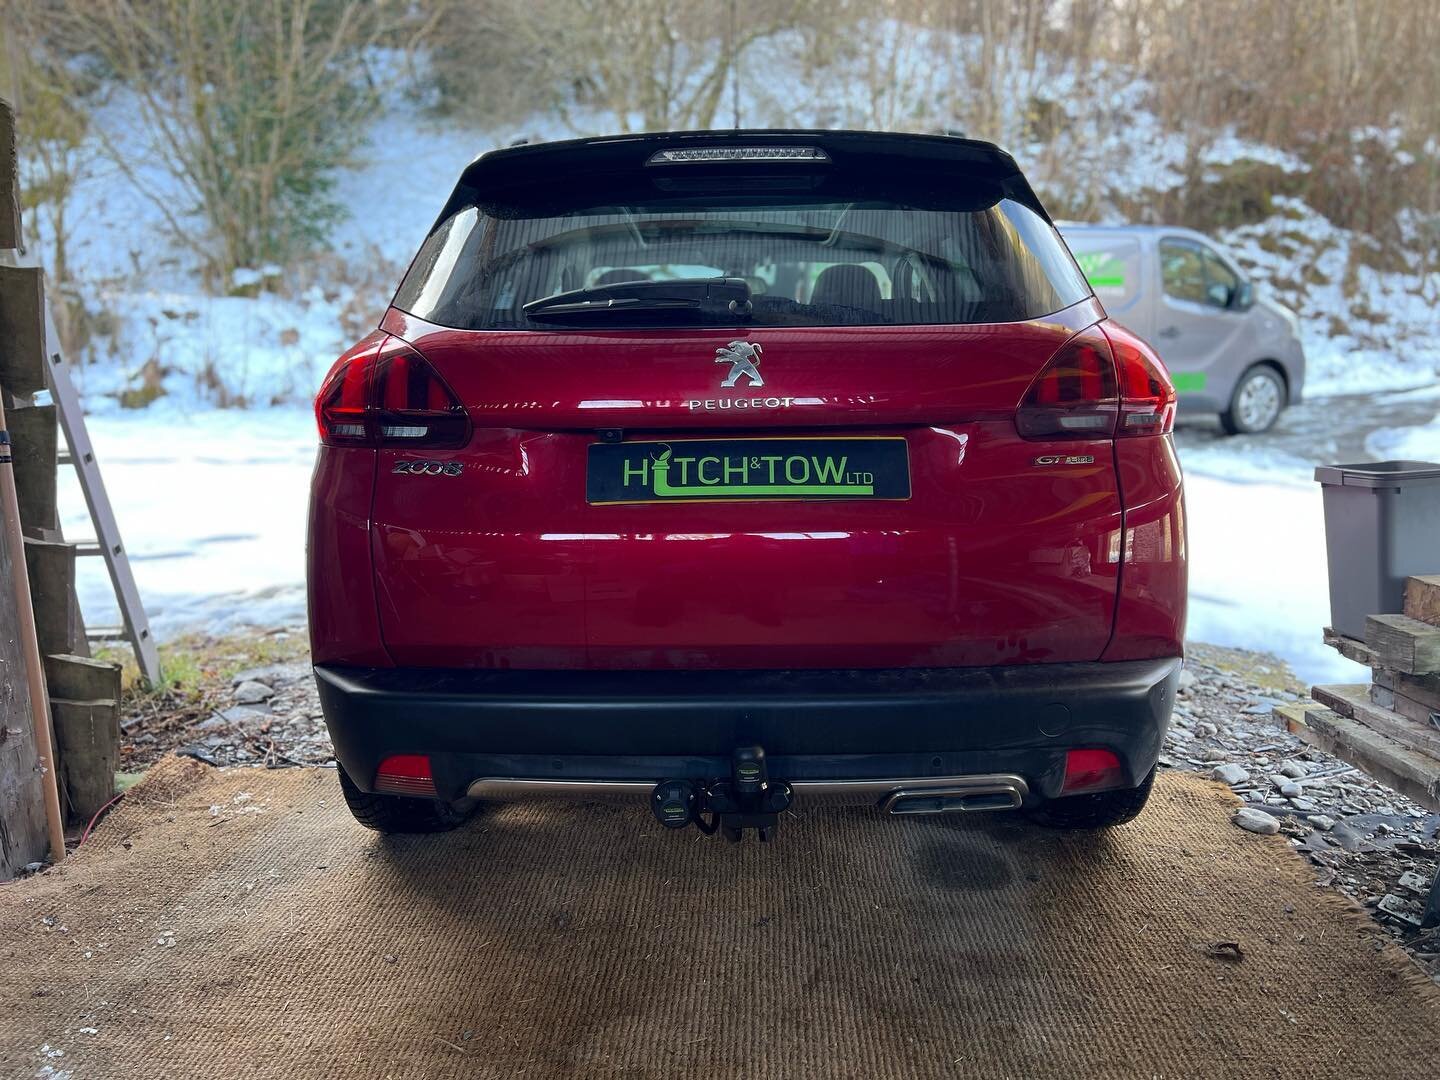 Peugeot 2008, fitted with a fixed flange towbar supplied by @tow_trust with dedicated single 7pin towing electrics from right-connections.

www.hitchandtowlimited.co.uk 

Customer can now hitch up their cycle carrier and enjoy the beautiful welsh cou